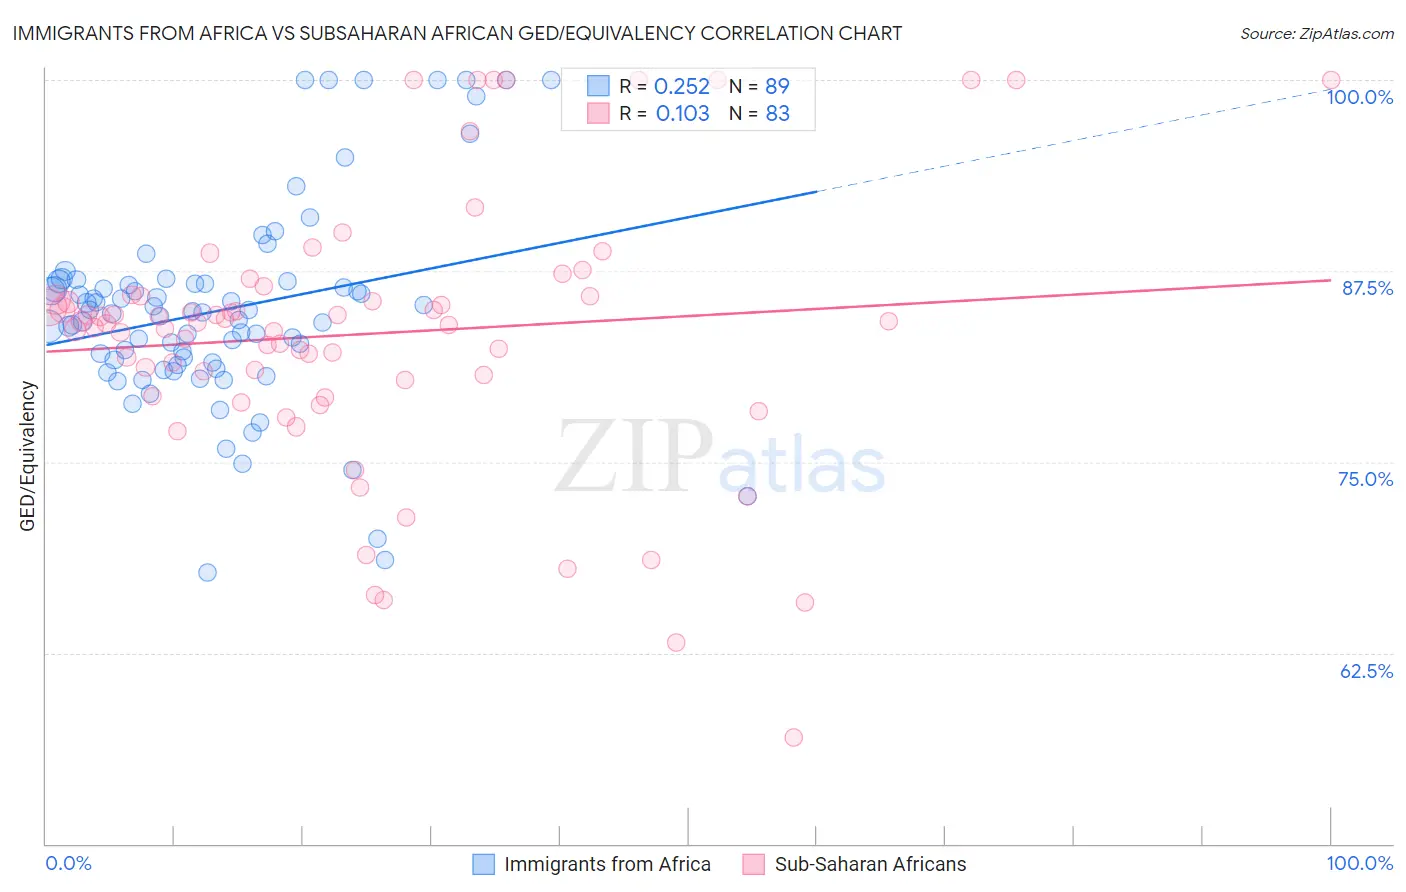 Immigrants from Africa vs Subsaharan African GED/Equivalency